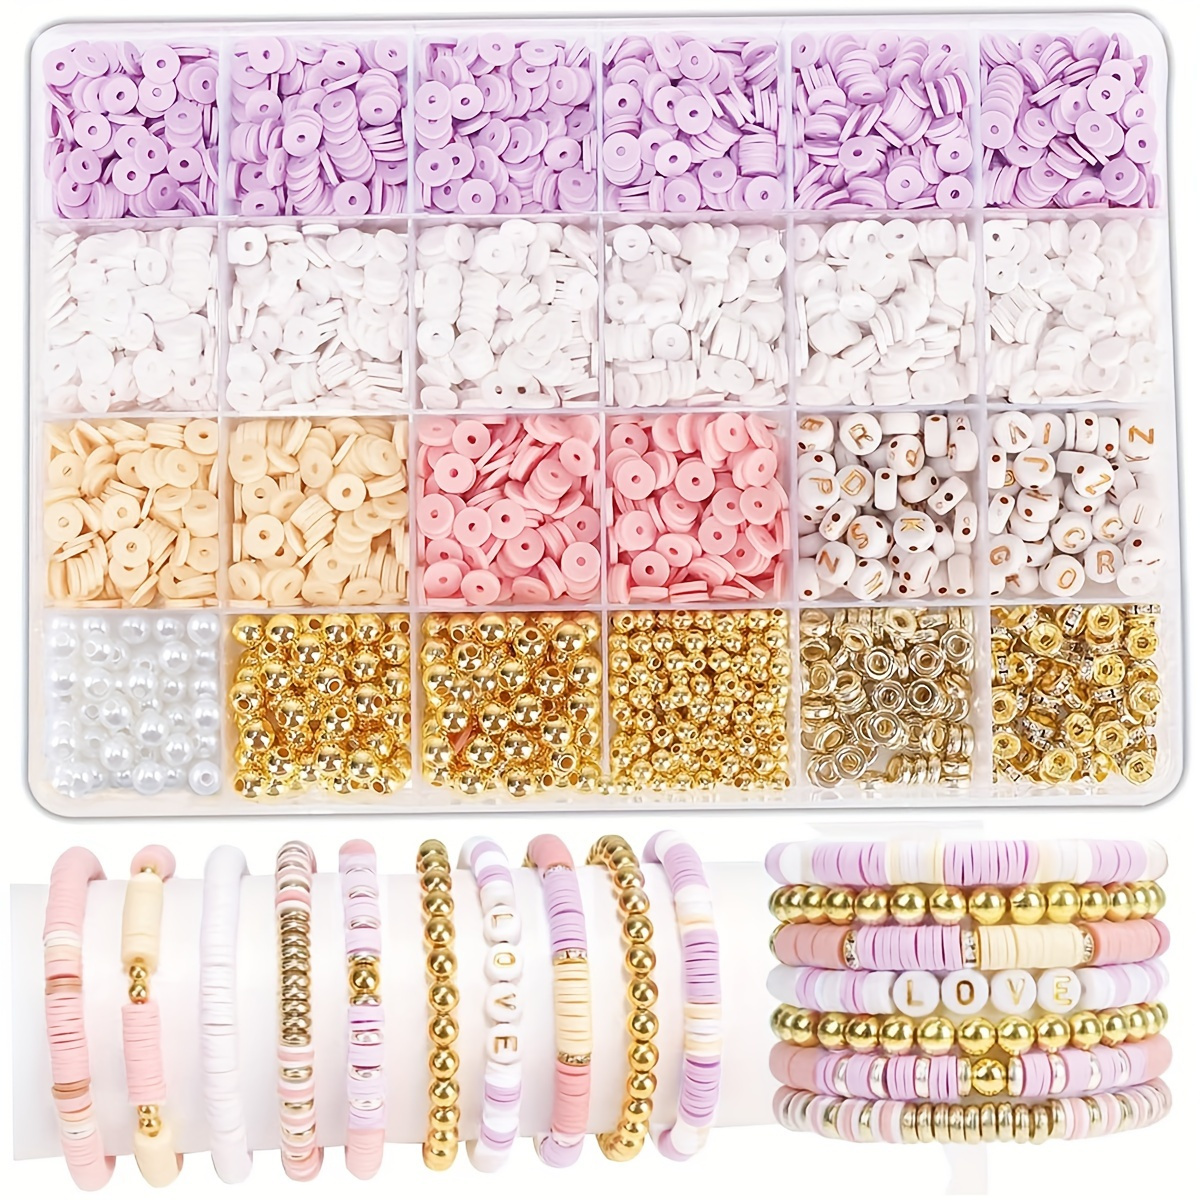 

Boho Chic 1600-piece Clay Bead Diy Bracelet Kit With 350 Gold Letter Beads, Ccb Spacers & Crystal Cord - Friendship Bracelet Craft Set For Women In Pink, White, Brown